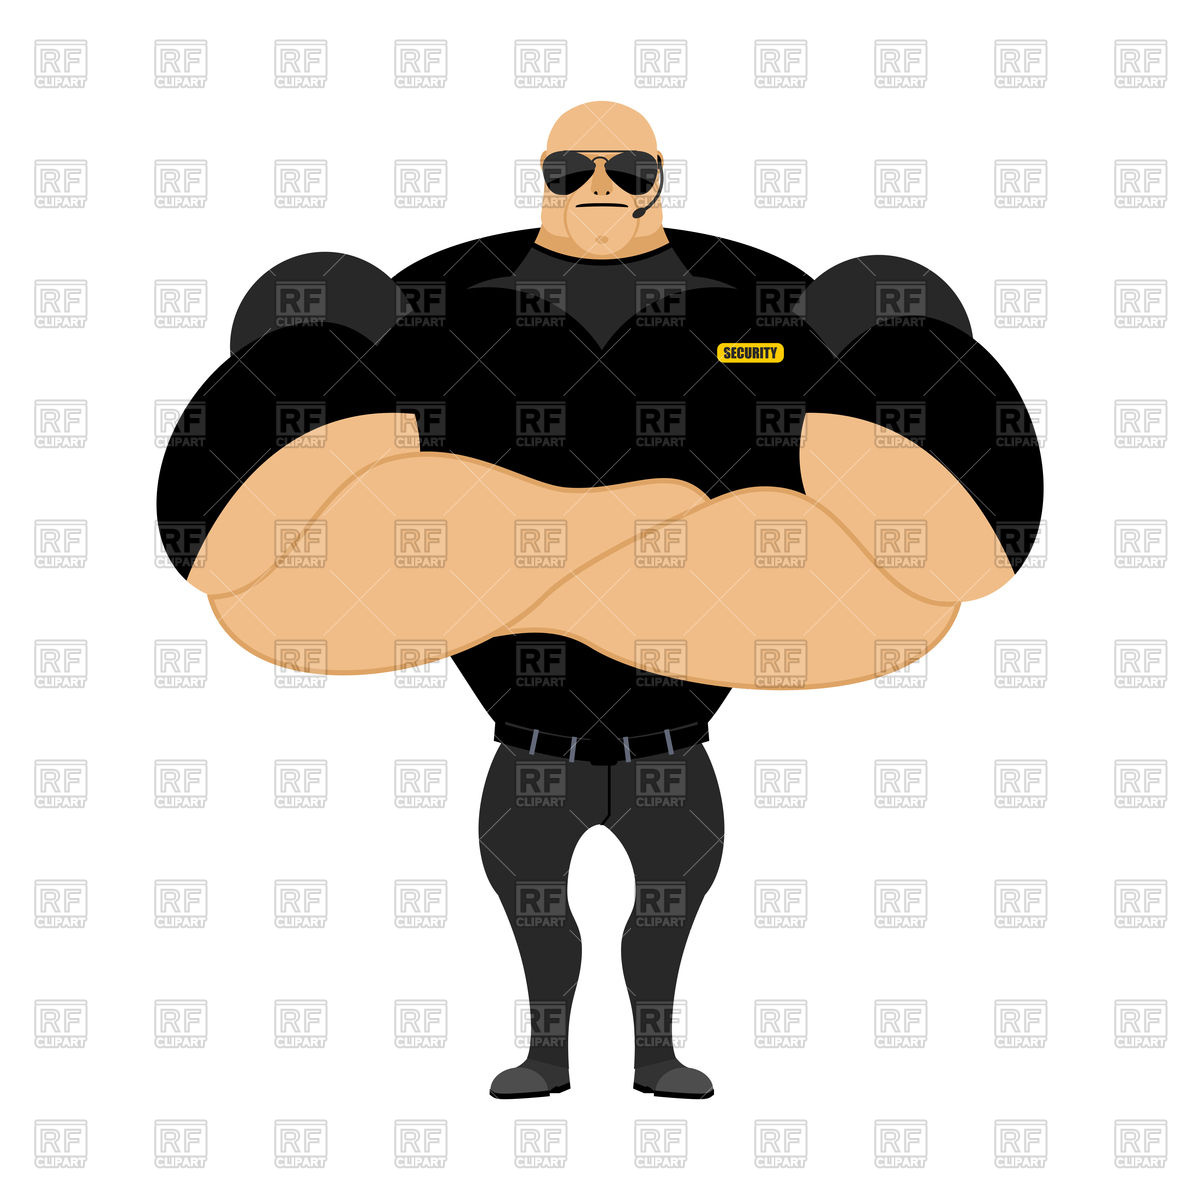 Family Guy Clipart at GetDrawings.com.